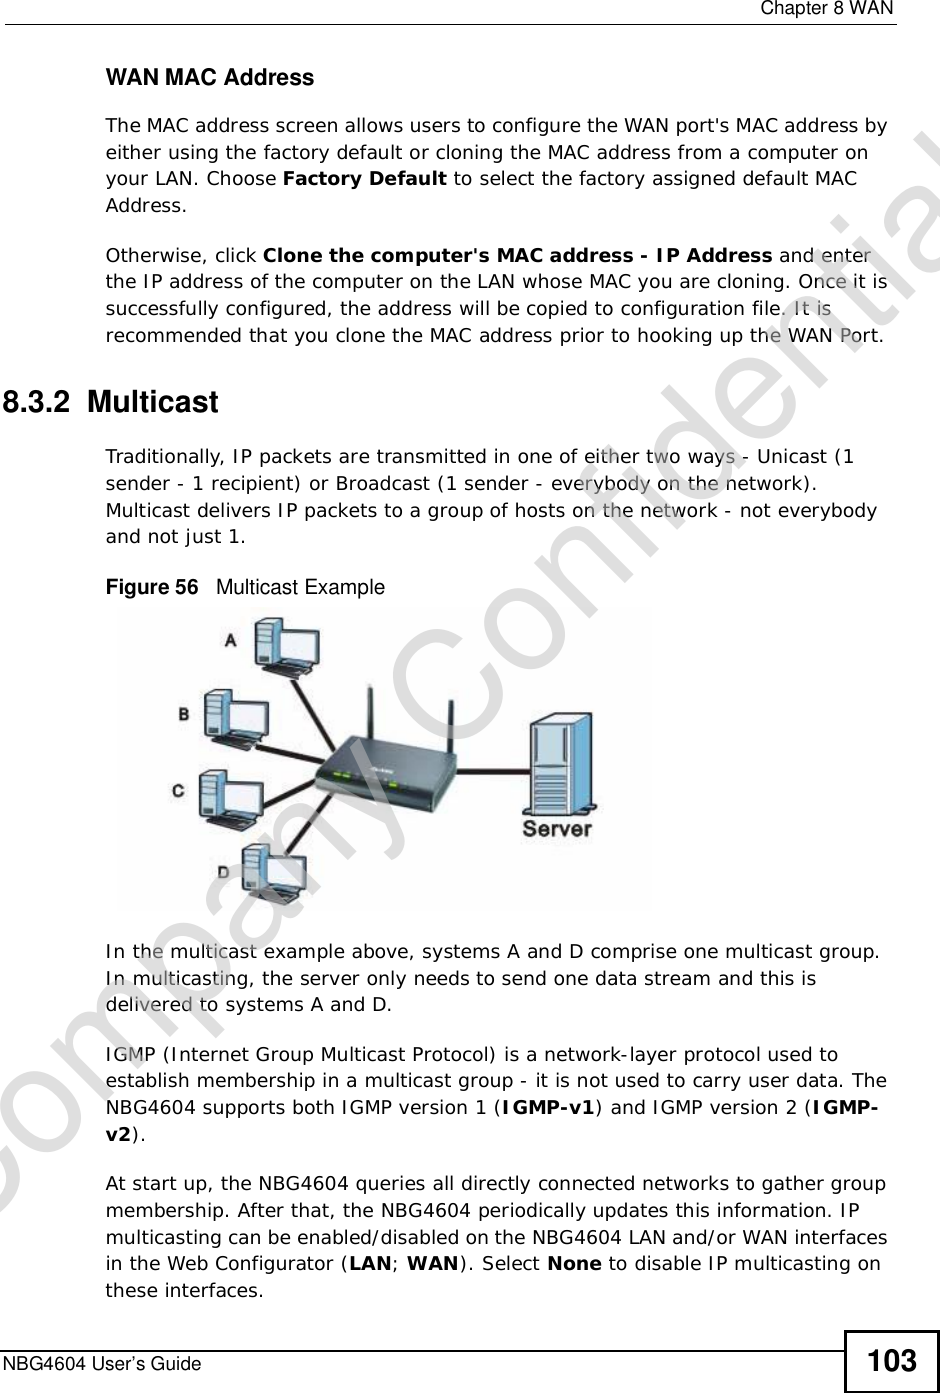  Chapter 8WANNBG4604 User’s Guide 103WAN MAC AddressThe MAC address screen allows users to configure the WAN port&apos;s MAC address by either using the factory default or cloning the MAC address from a computer on your LAN. Choose Factory Default to select the factory assigned default MAC Address.Otherwise,click Clone the computer&apos;s MAC address - IP Address and enter the IP address of the computer on the LAN whose MAC you are cloning. Once it is successfully configured, the address will be copied to configuration file. It is recommended that you clone the MAC address prior to hooking up the WAN Port.8.3.2  MulticastTraditionally, IP packets are transmitted in one of either two ways - Unicast (1 sender - 1 recipient) or Broadcast (1 sender - everybody on the network). Multicast delivers IP packets to a group of hosts on the network - not everybody and not just 1. Figure 56   Multicast ExampleIn the multicast example above, systems A and D comprise one multicast group. In multicasting, the server only needs to send one data stream and this is delivered to systems A and D. IGMP (Internet Group Multicast Protocol) is a network-layer protocol used to establish membership in a multicast group - it is not used to carry user data. The NBG4604 supports both IGMP version 1 (IGMP-v1) and IGMP version 2 (IGMP-v2). At start up, the NBG4604 queries all directly connected networks to gather group membership. After that, the NBG4604 periodically updates this information. IP multicasting can be enabled/disabled on the NBG4604 LAN and/or WAN interfaces in the Web Configurator (LAN; WAN). Select None to disable IP multicasting on these interfaces.Company Confidential